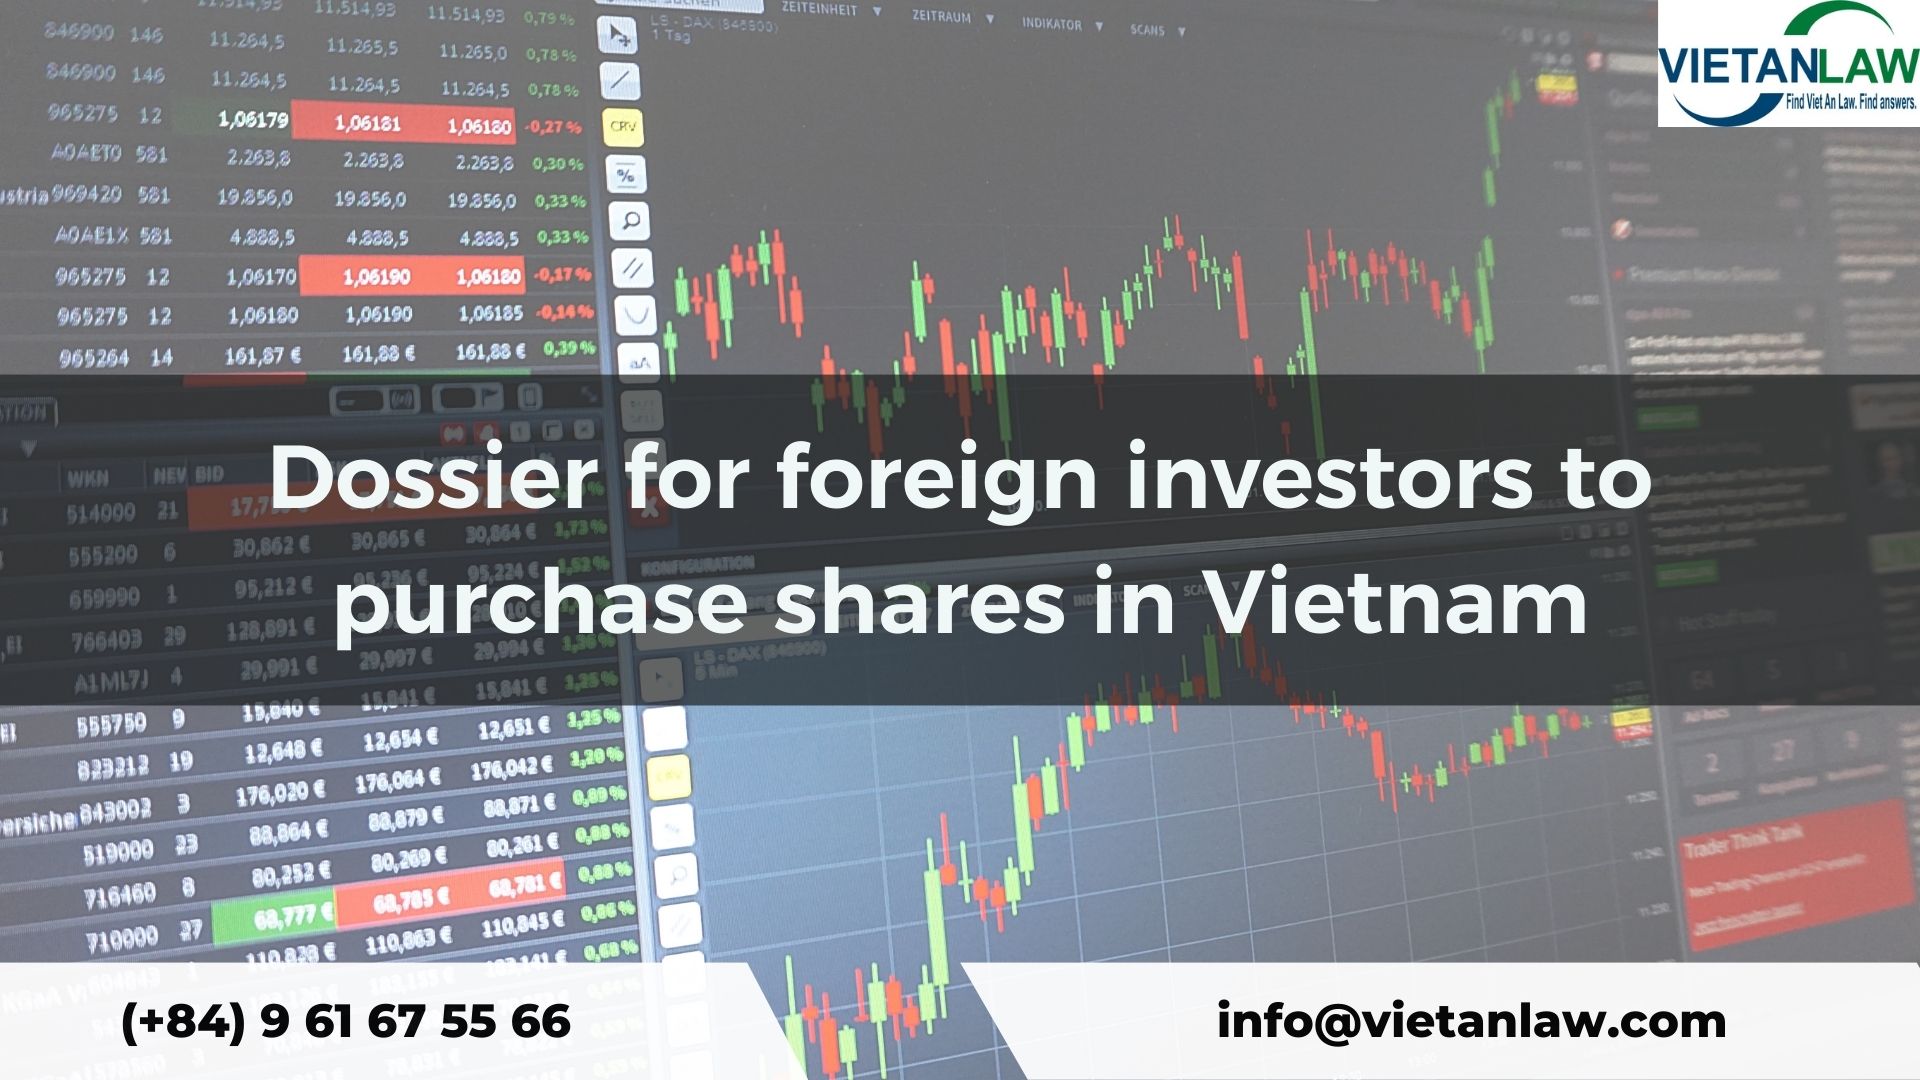 Dossier for foreign investors to purchase shares in Vietnam